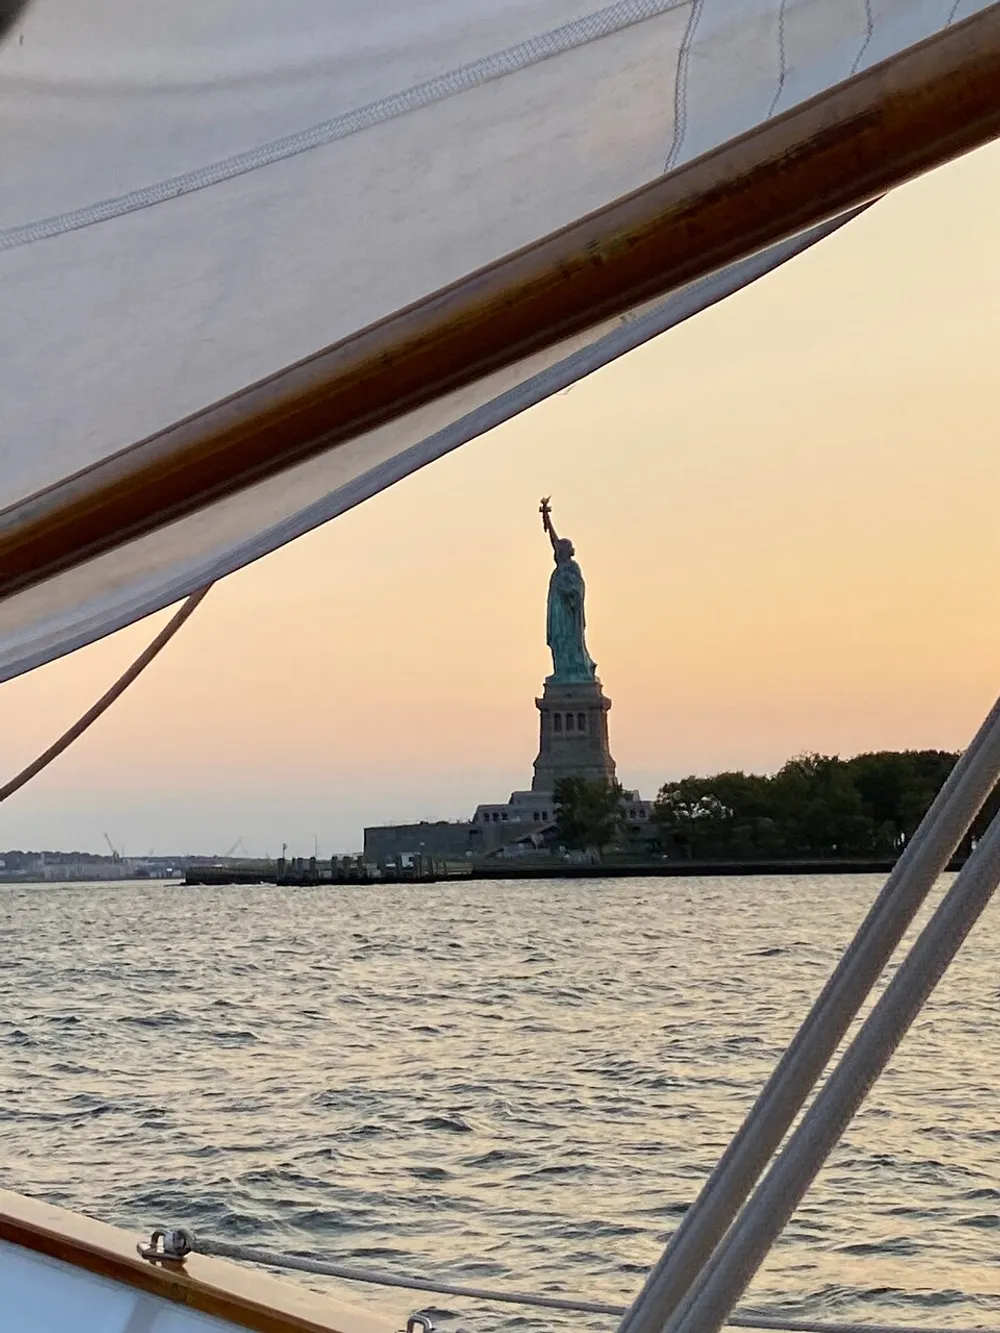 The Statue of Liberty is framed by the sails of a boat during a sunset